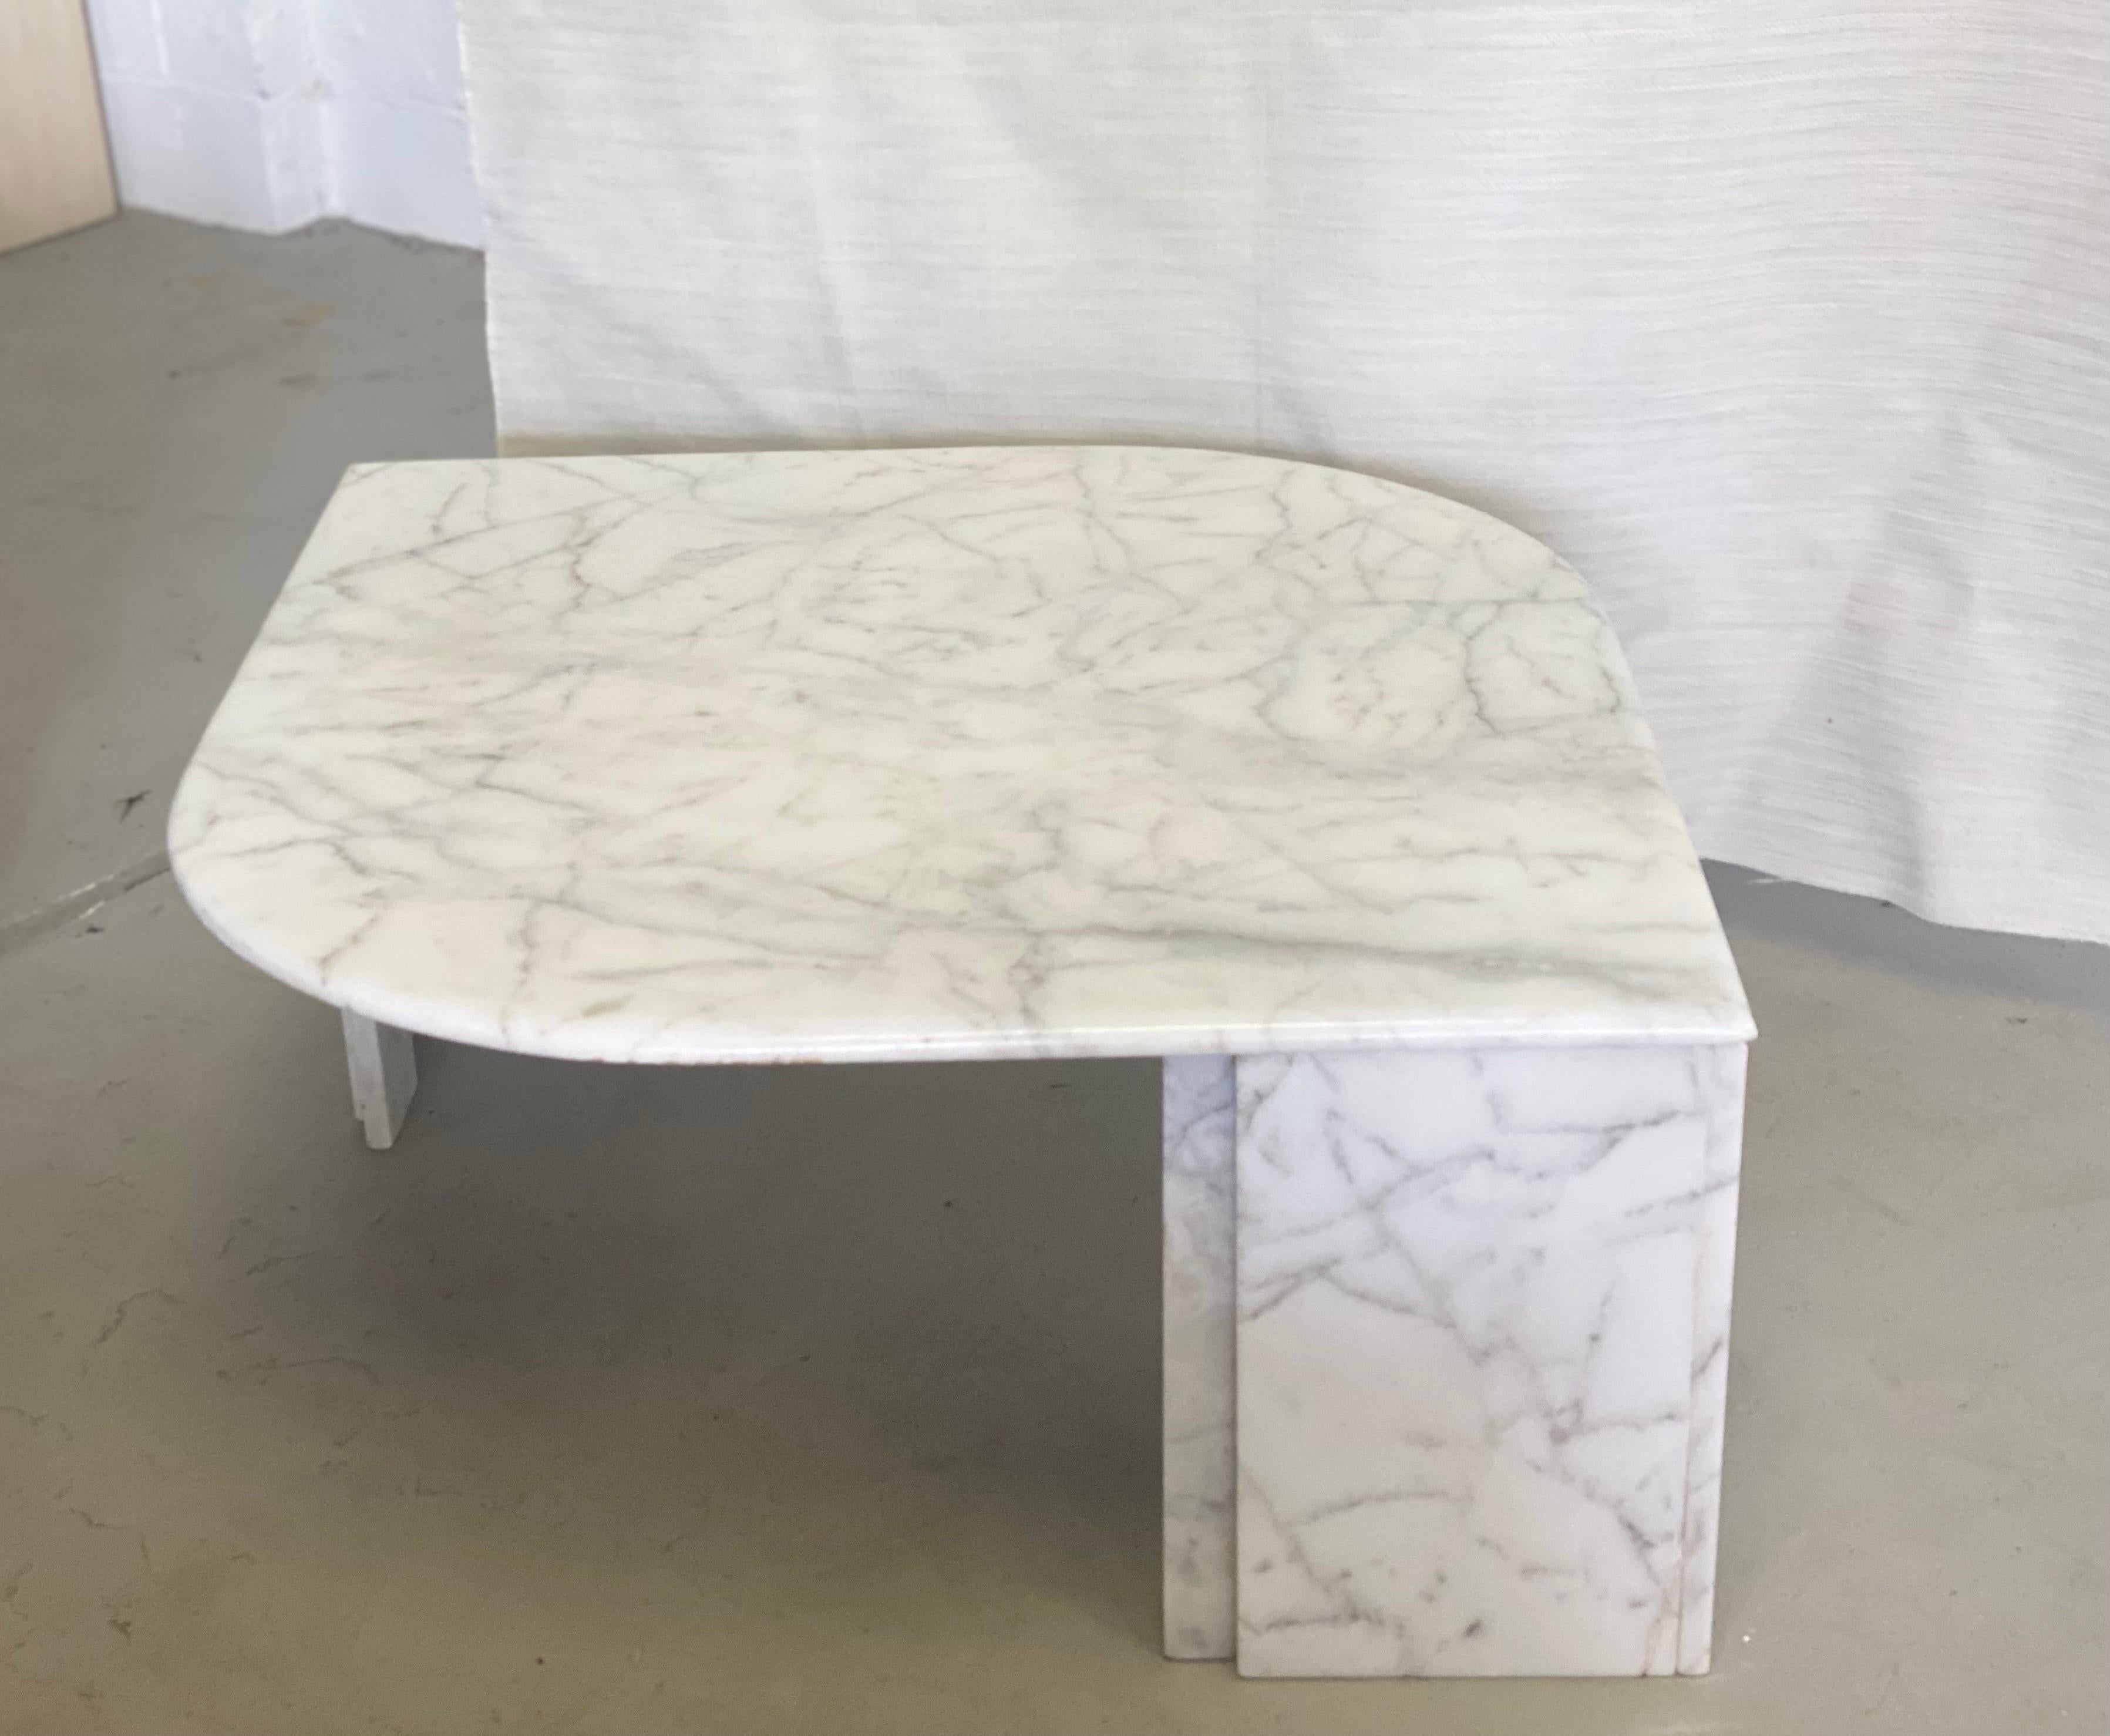 We are very pleased to offer a minimal, white marble coffee table, circa the 1970s. A polished marble teardrop tabletop rests on two faceted pedestals; in addition, a refined bullnose edge gives the coffee table a sophisticated finish. With its